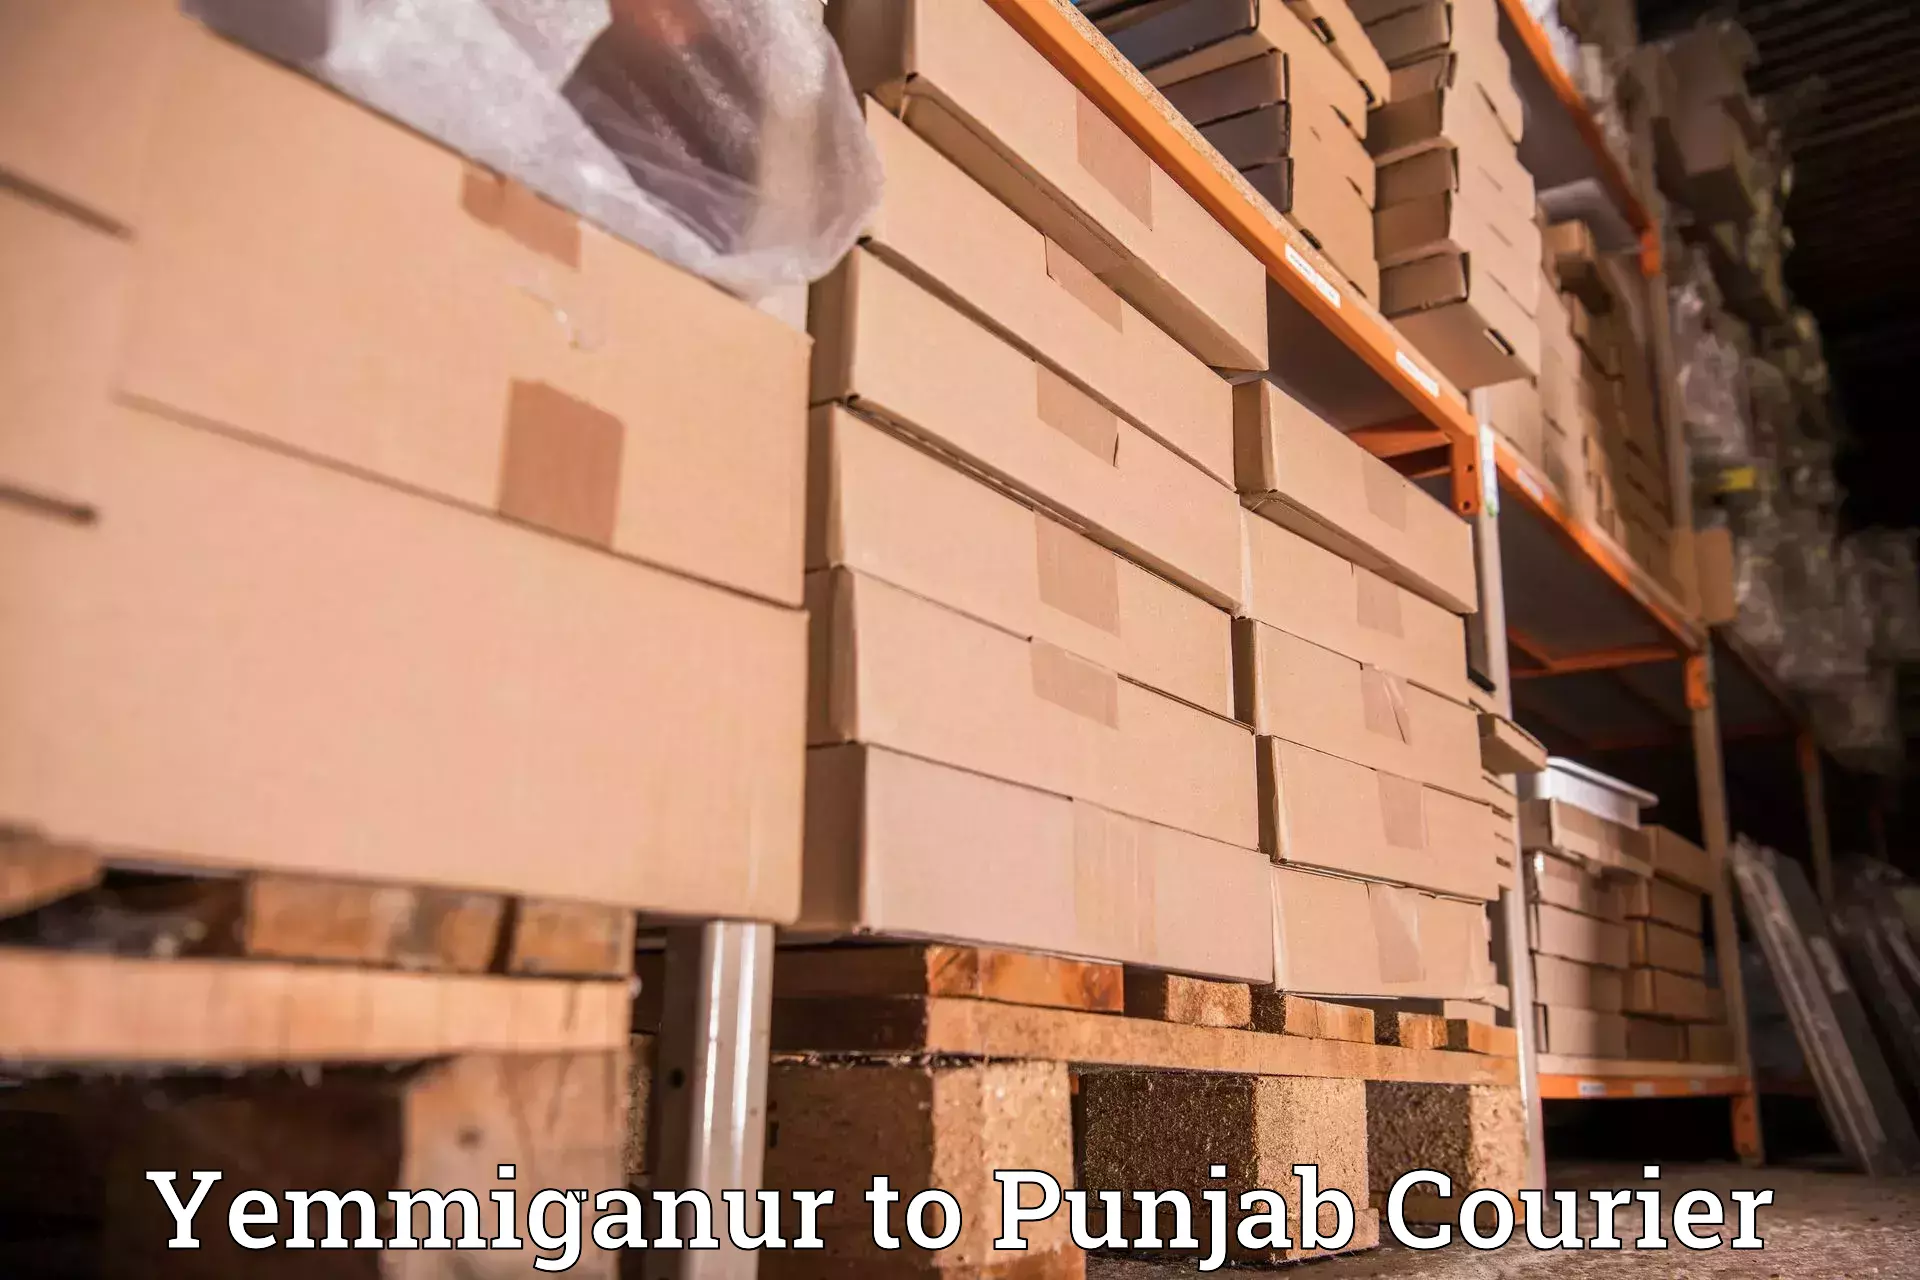 Nationwide parcel services Yemmiganur to Mohali